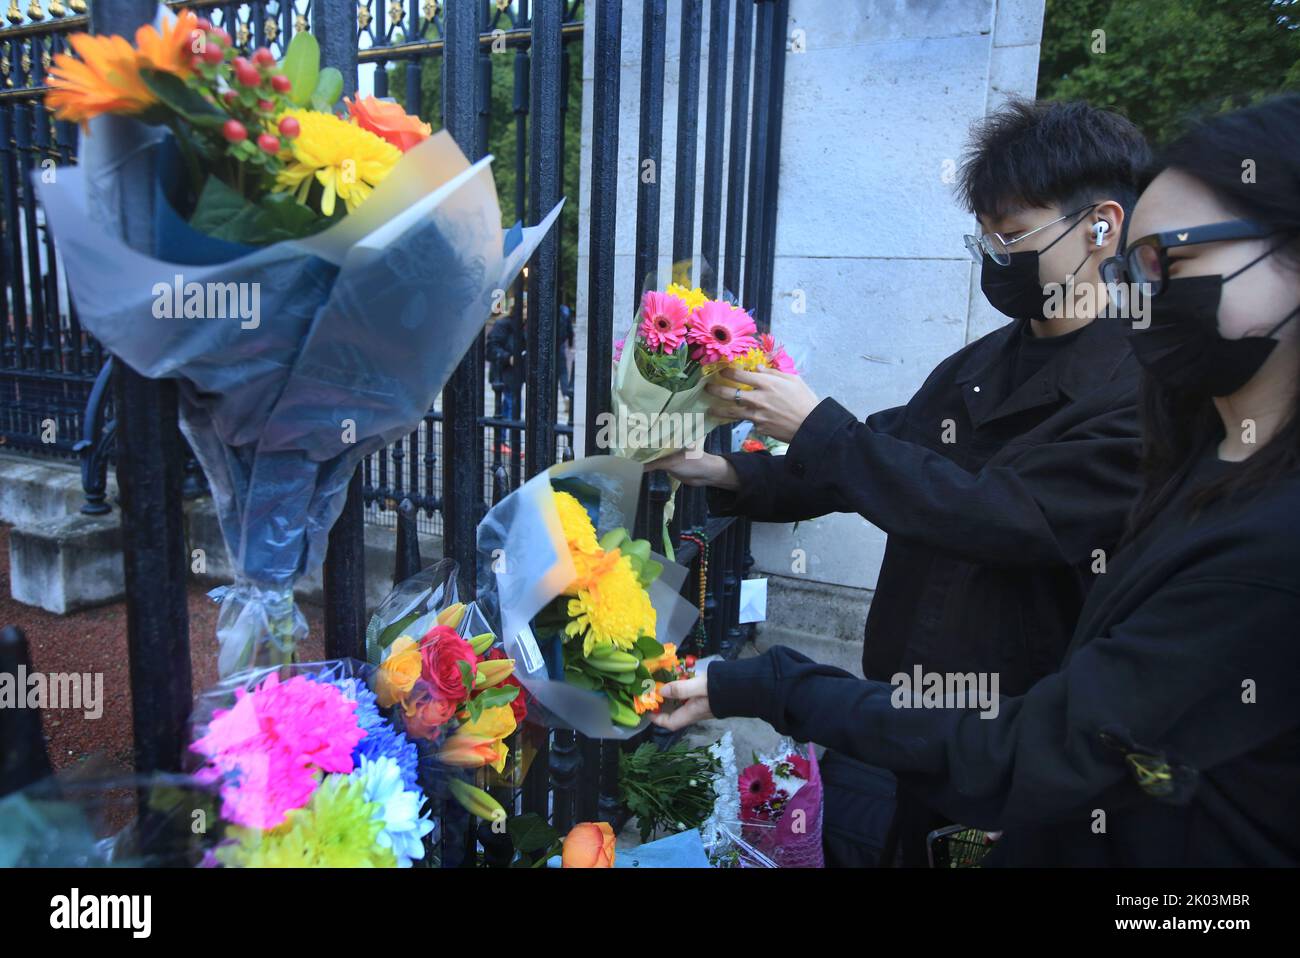 London, UK. 09th Sep, 2022. Members of the public come from all over UK to leave floral tributes outside the gates of Buckingham Palace. Her Majesty Queen Elizabeth II has died at Balmoral Castle at the age of 96, having reigned over the United Kingdom for 70 years. (Photo by Martin Pope/SOPA Images/Sipa USA) Credit: Sipa USA/Alamy Live News Stock Photo